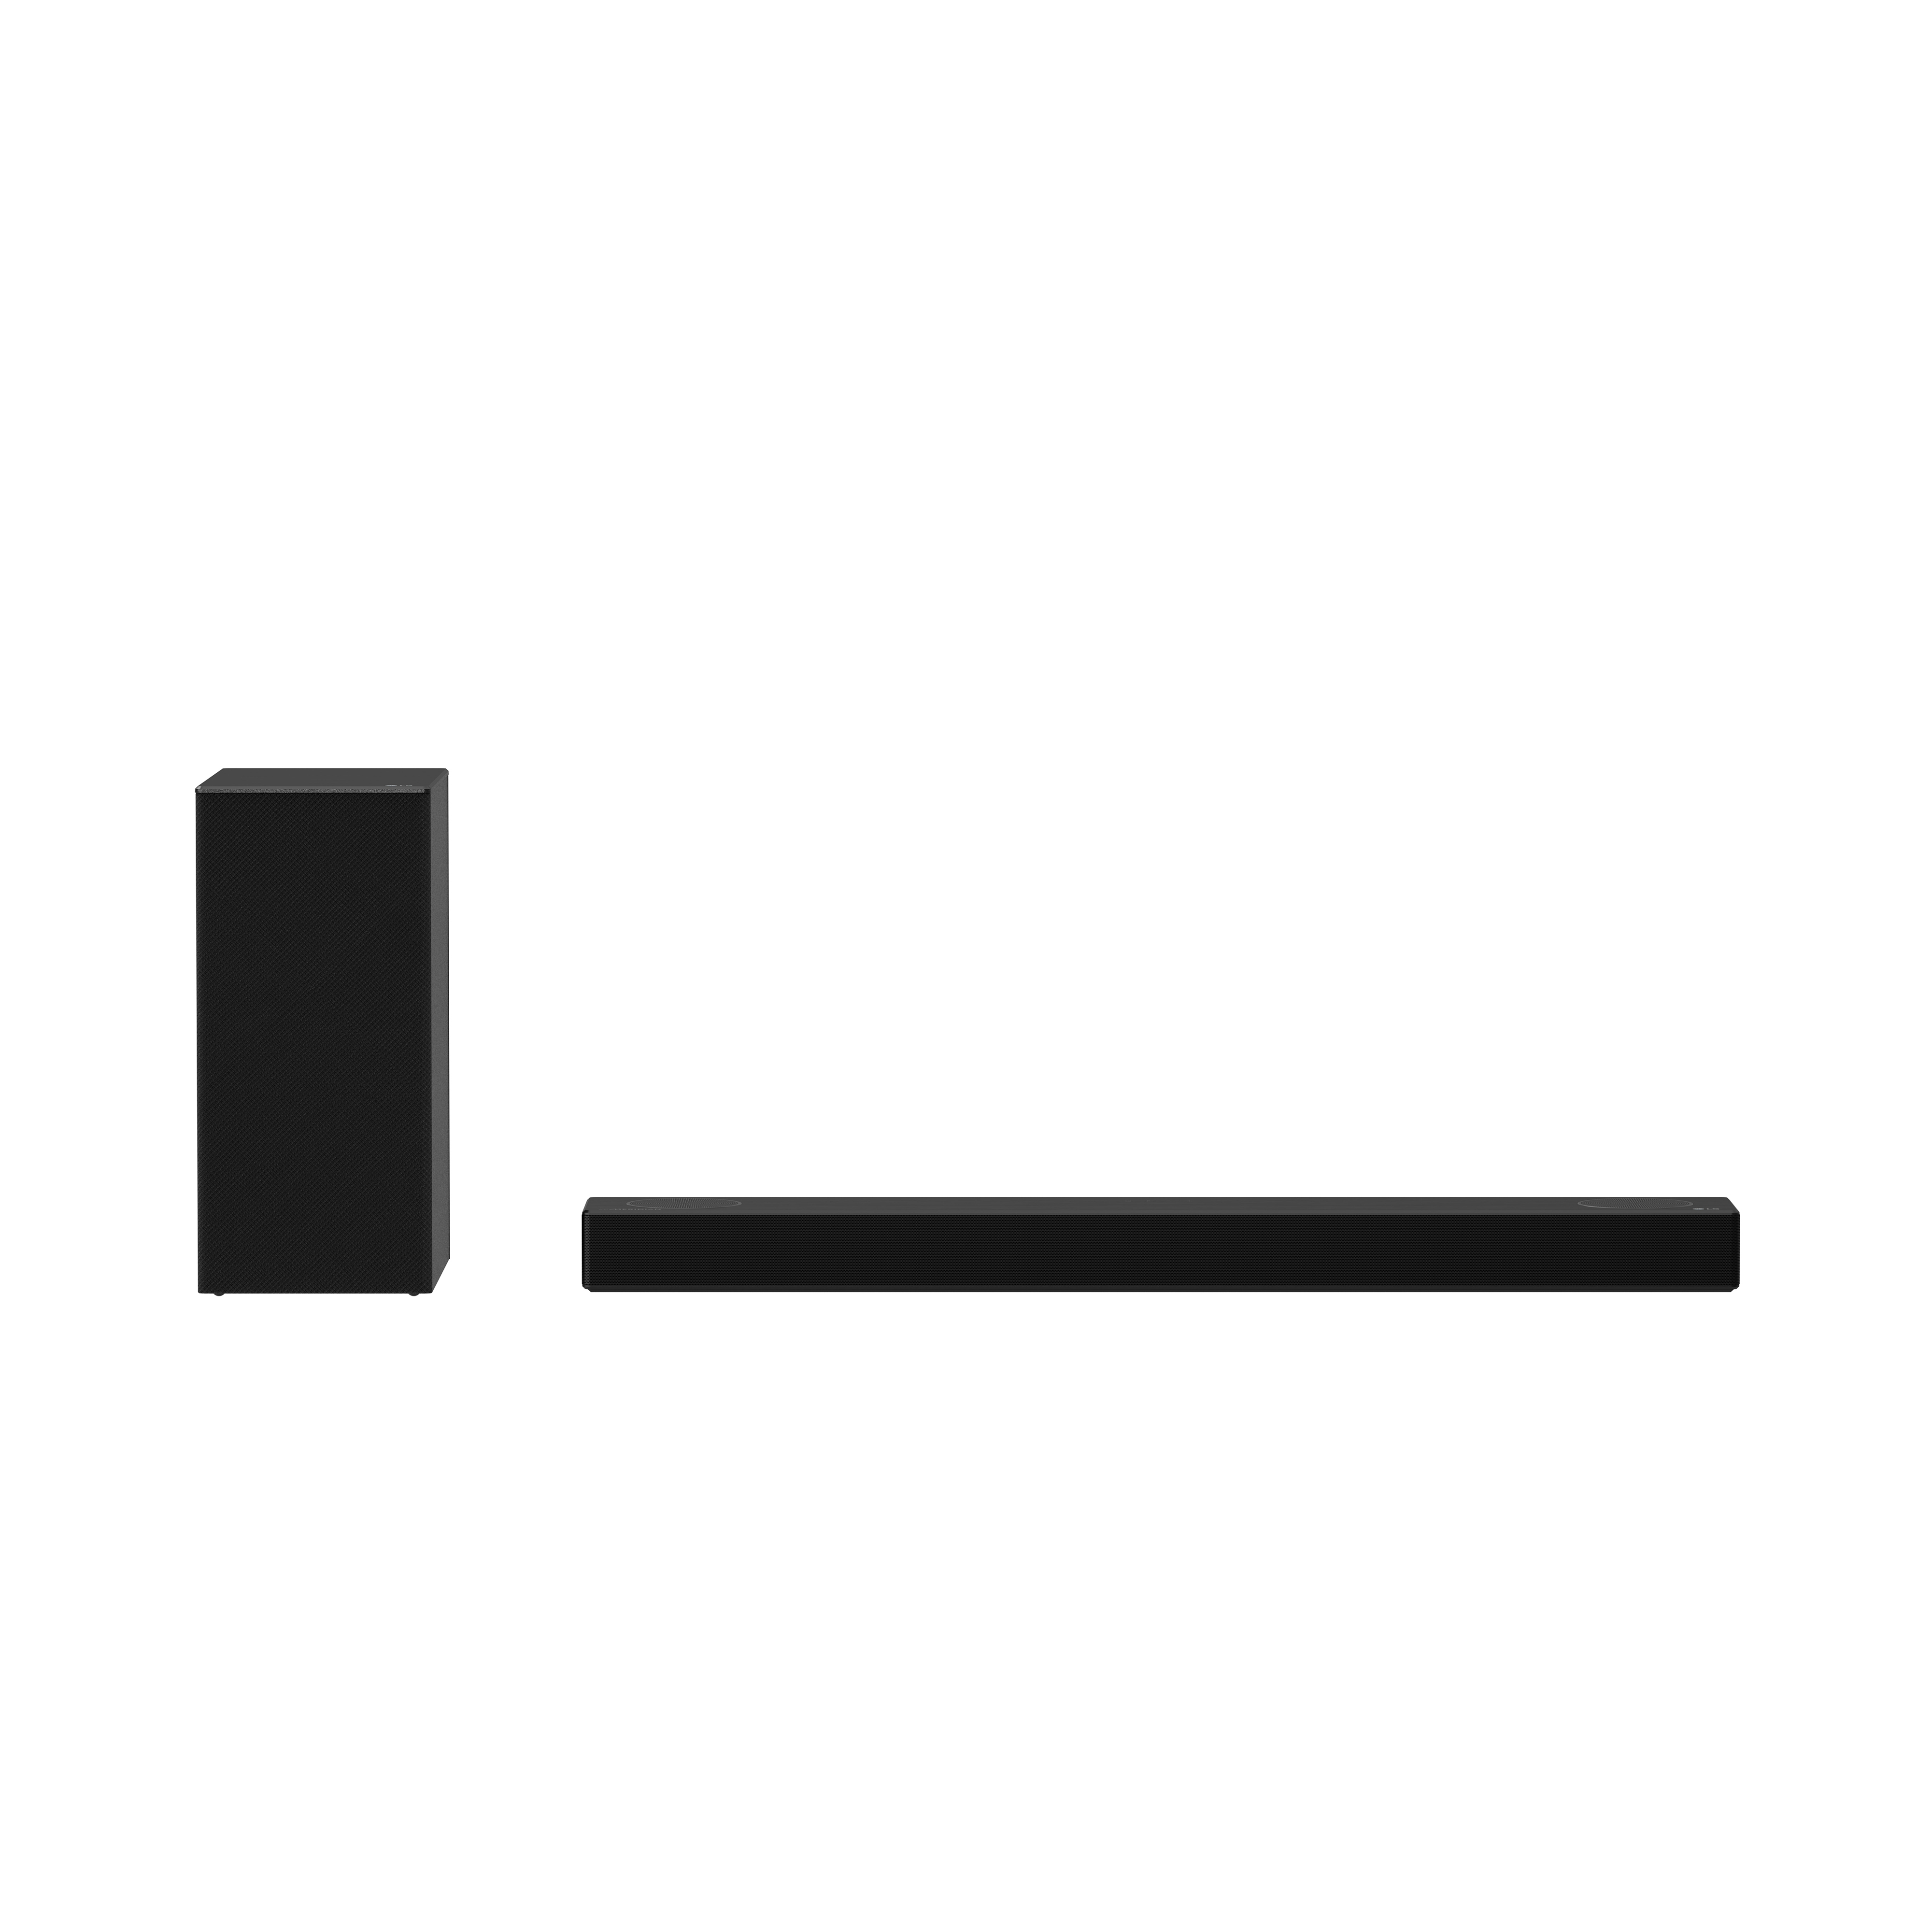 LG 3.1.2 Channel High Res Audio Soundbar with Dolby Atmos and 4K Pass-Through, SPM7A - image 1 of 12